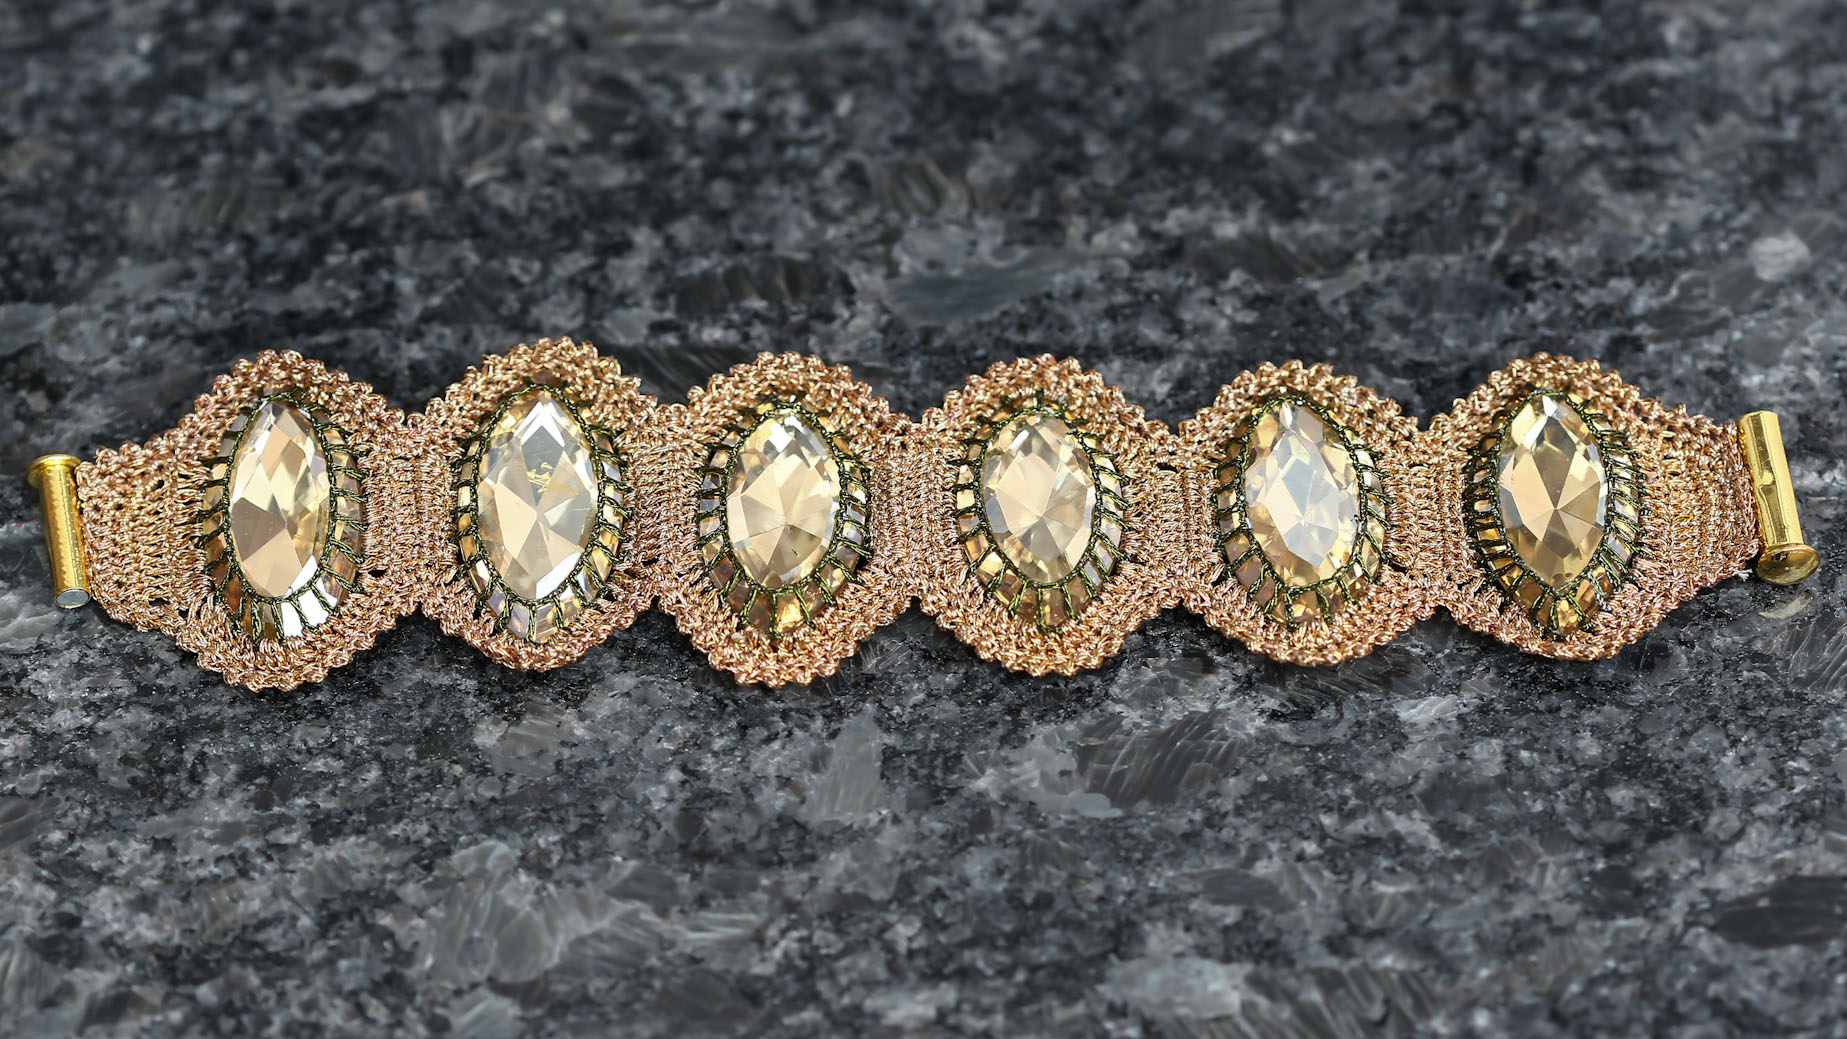 Statement bracelet with large day-shape fancy stones in champagne colour.